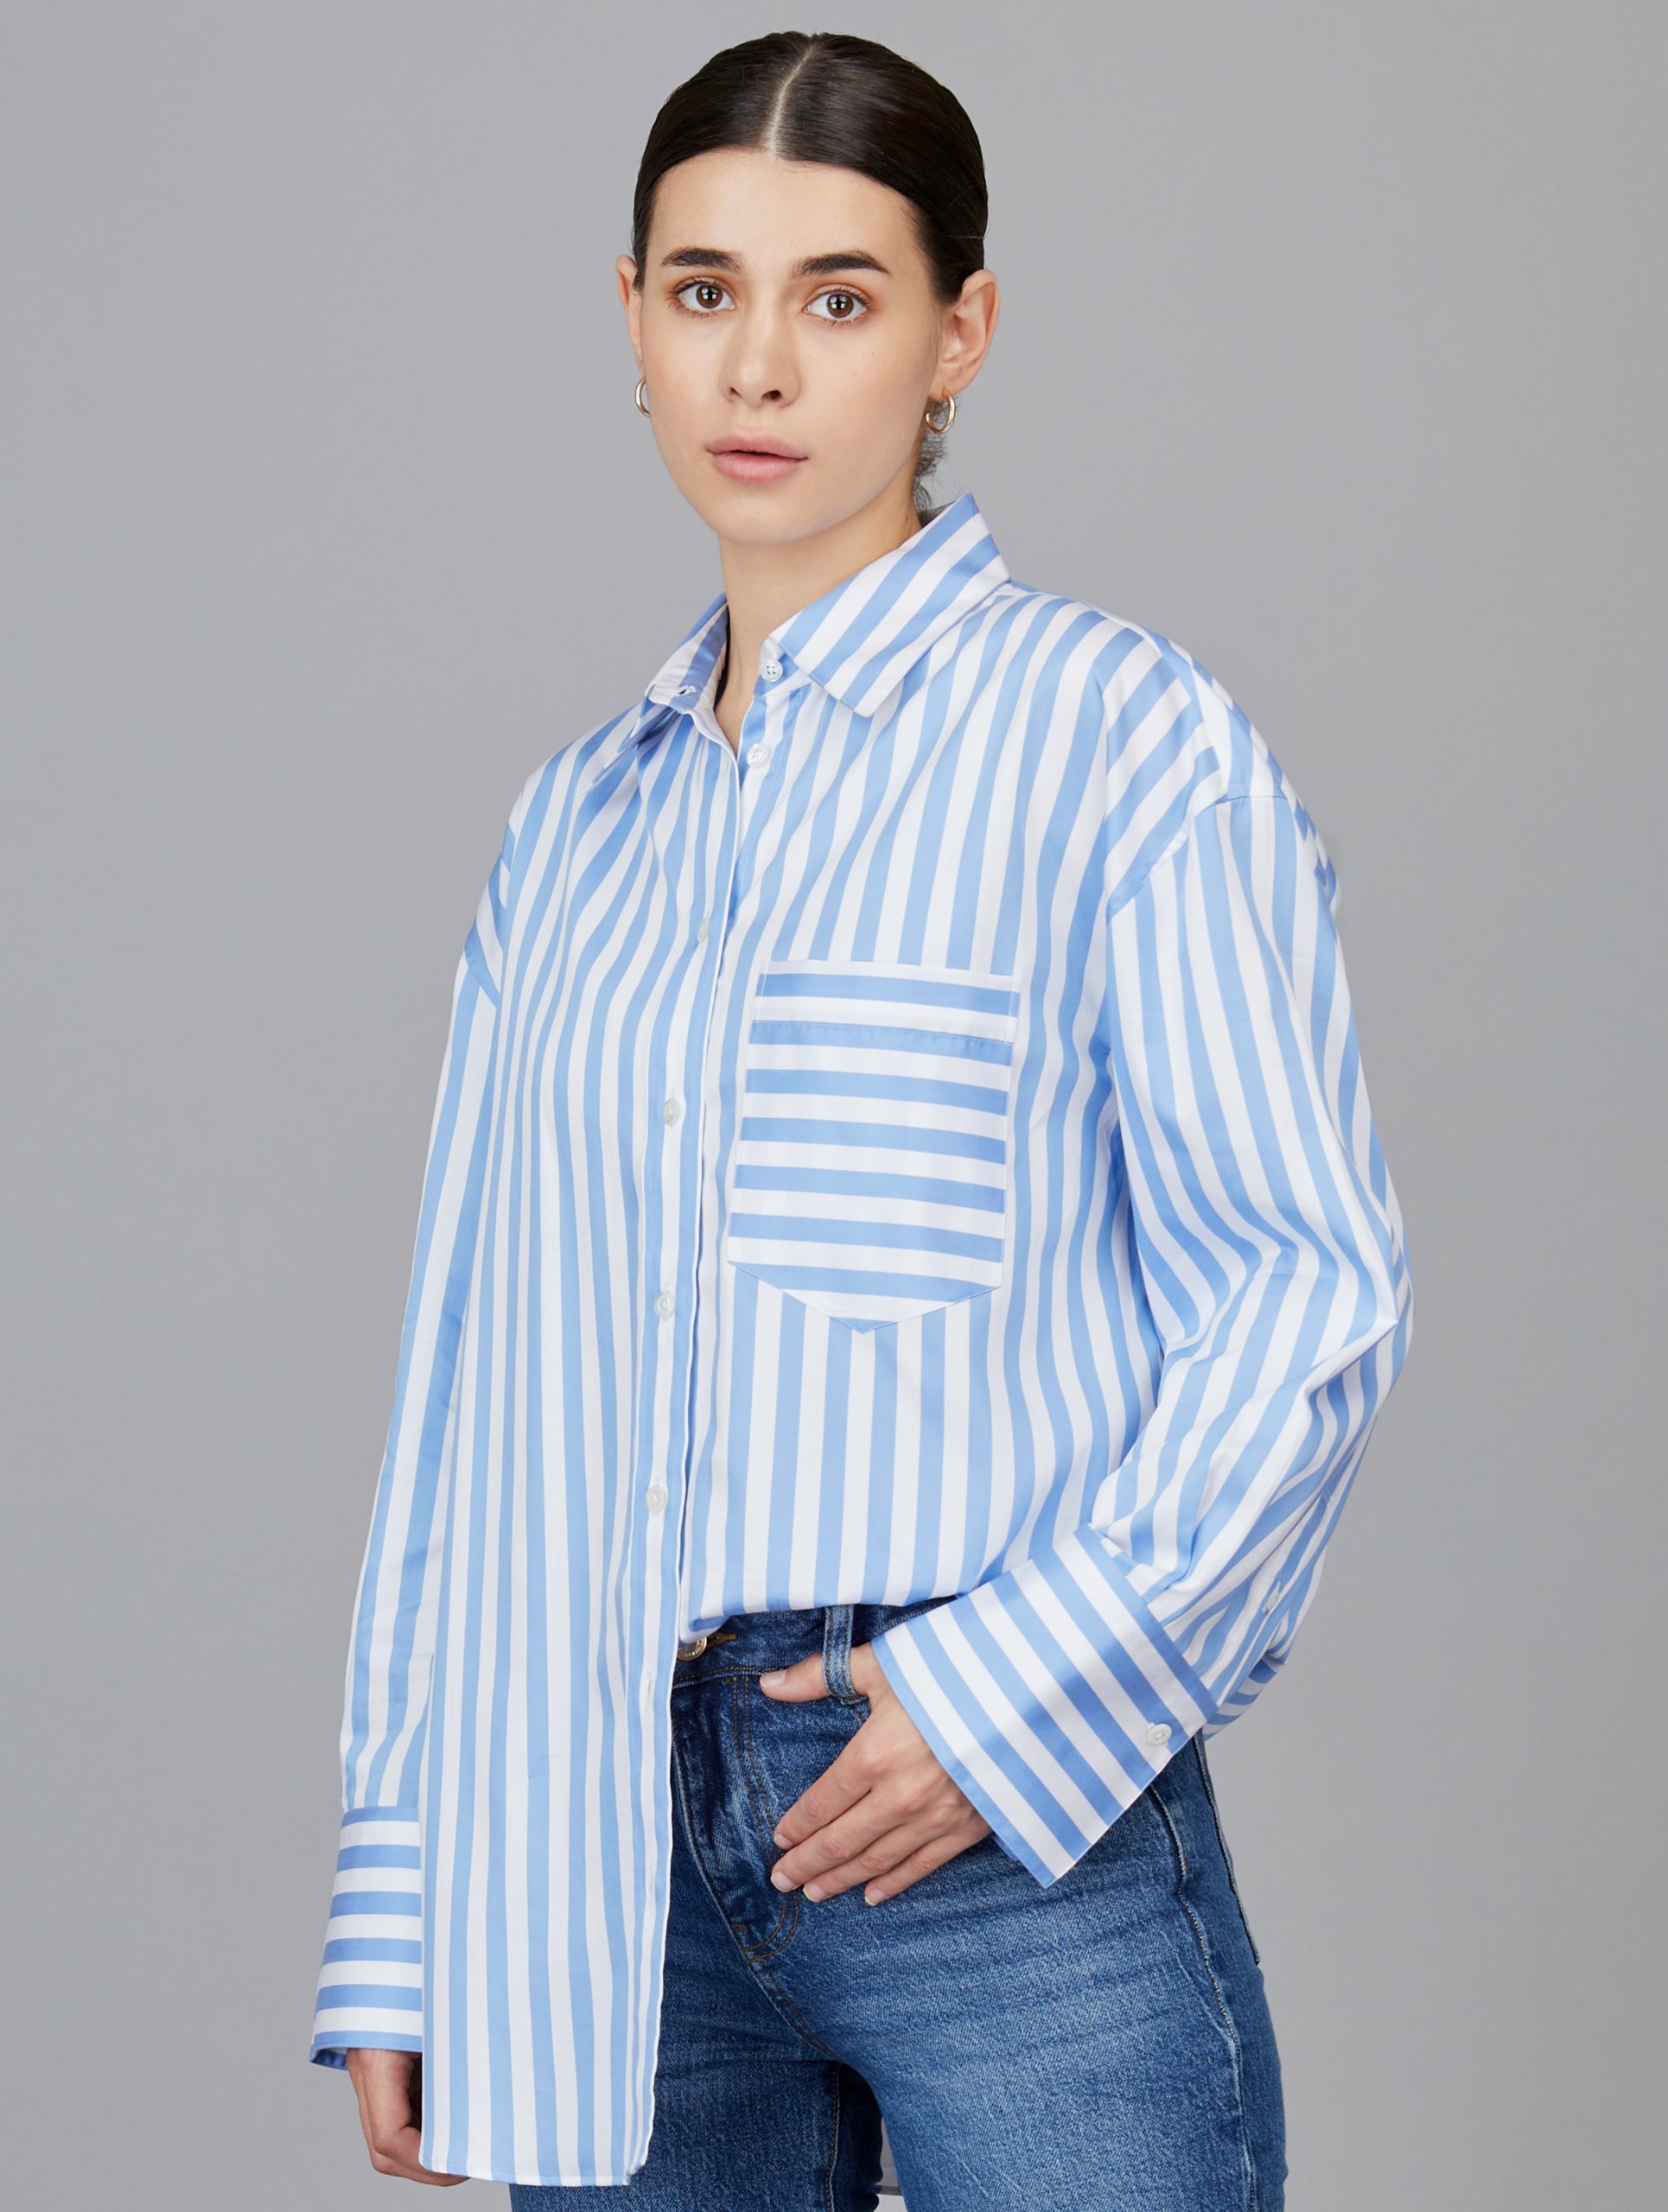 Awning stripe boyfriend shirt in sky blue colour - Camessi Collection